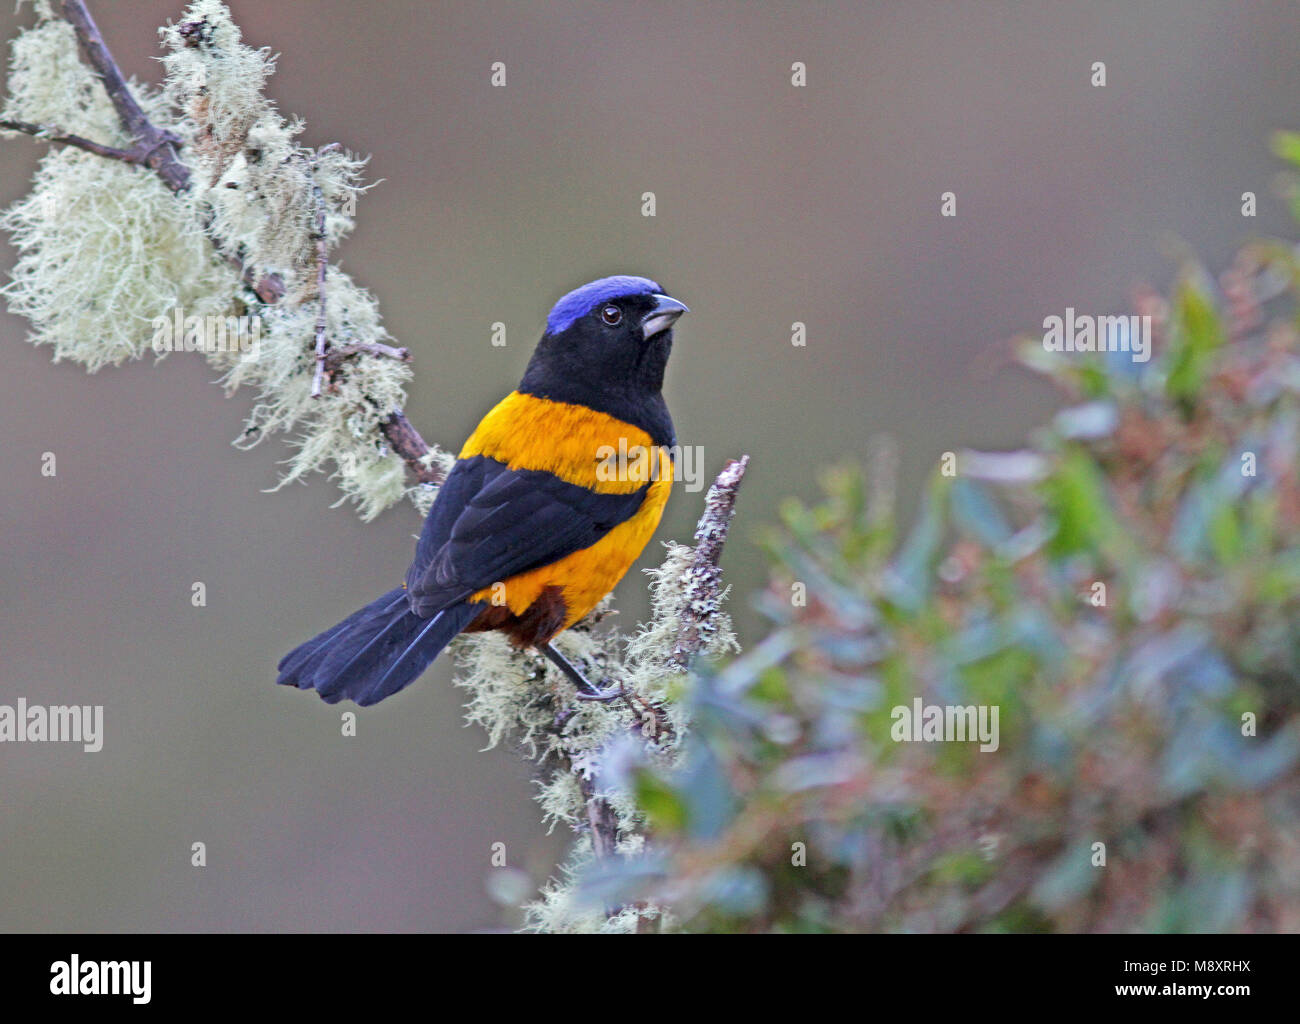 Golden-backed Mountain tanager (Cnemathraupis aureodorsalis) is an endangered species of bird in the tanager family. This large and brightly colored t Stock Photo